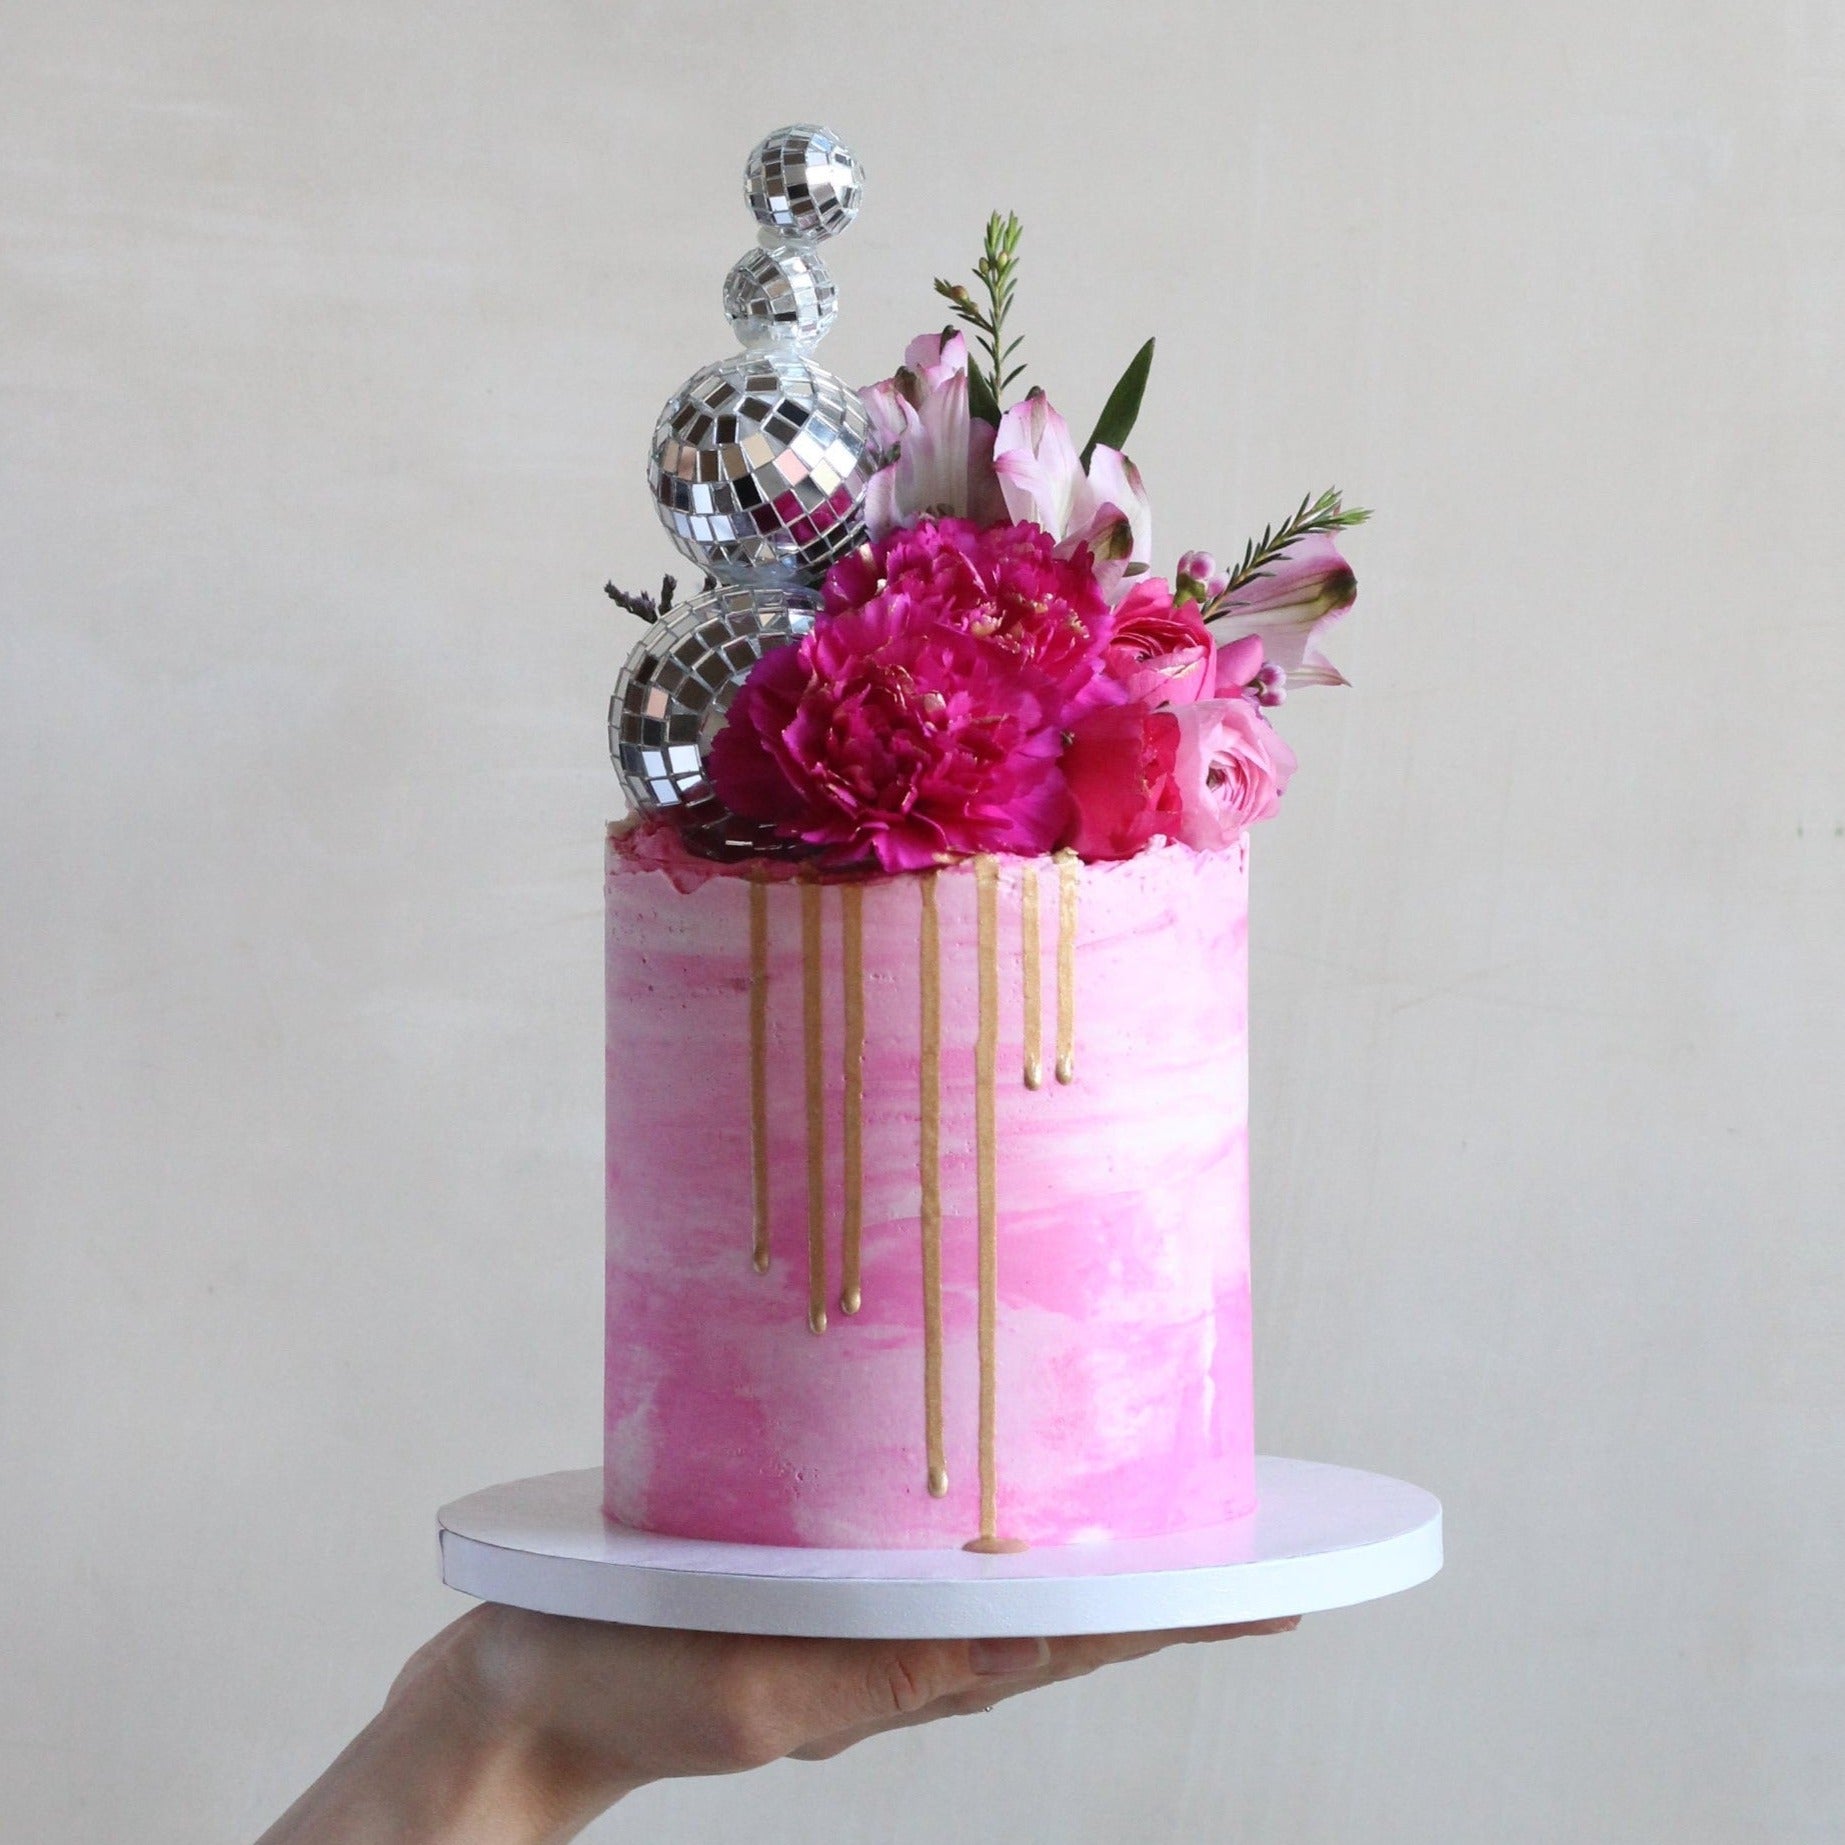 Golden Hour Cake for disco queens with pink icing, bold florals, gold drip and of course the disco balls!